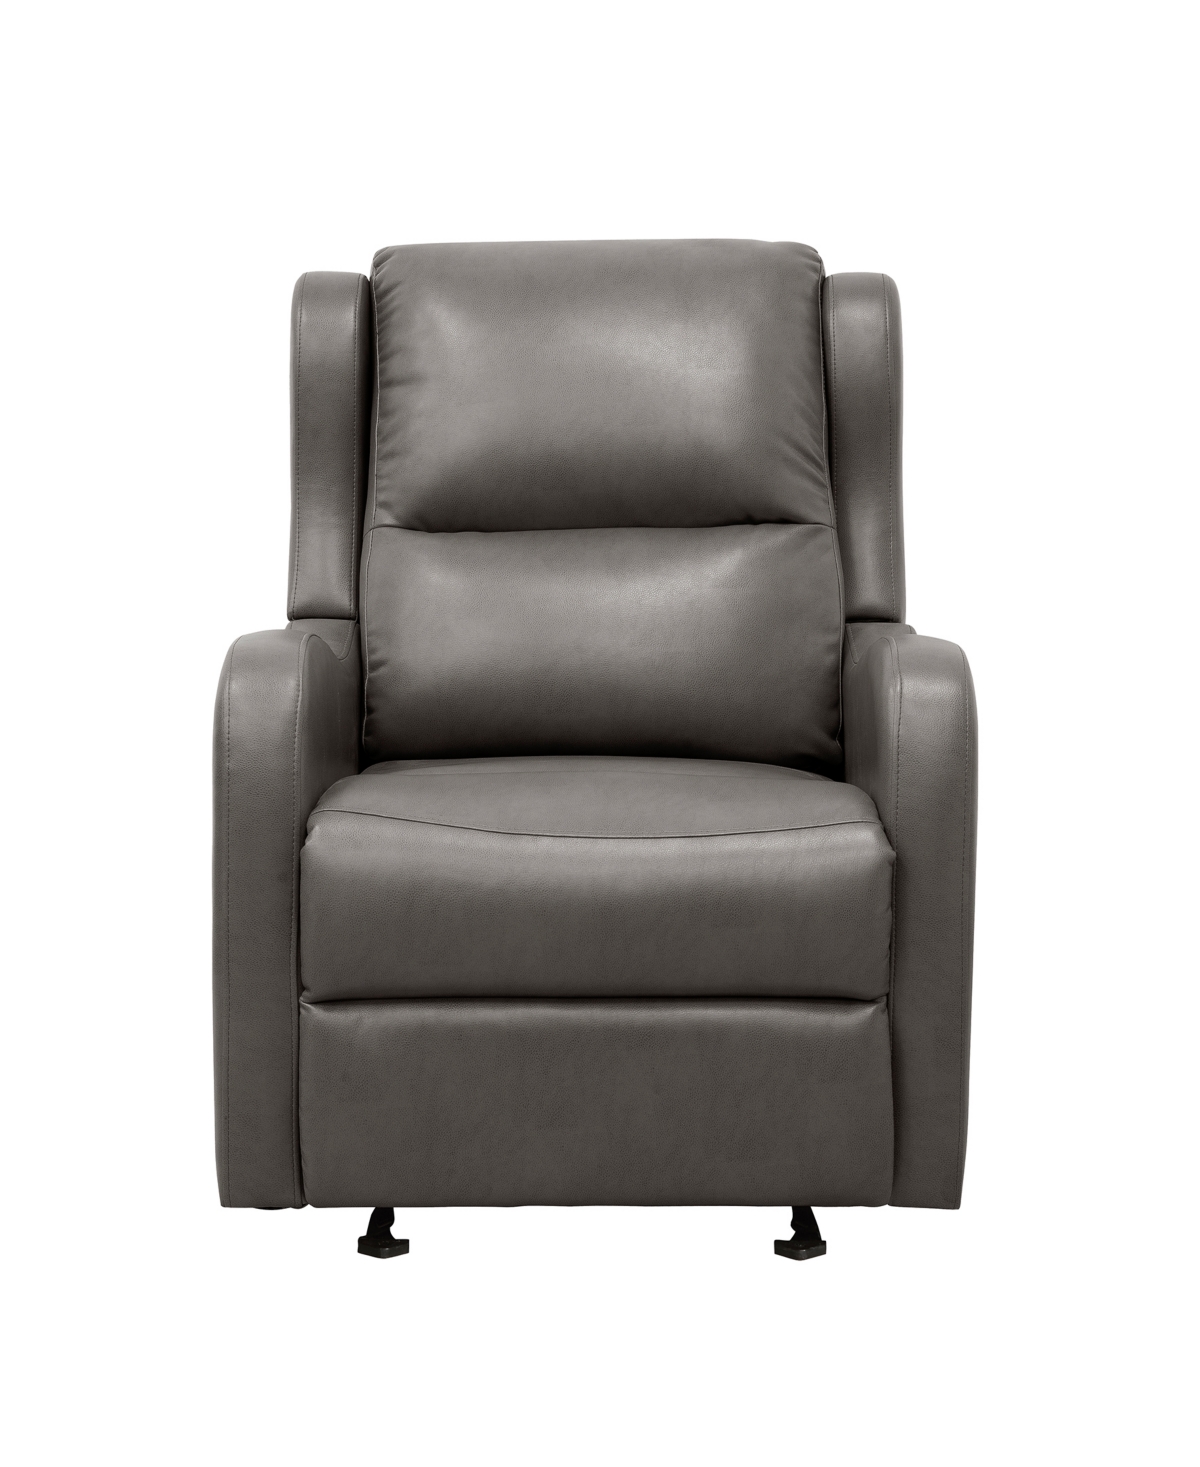 Shop Homelegance White Label Cynthia 30" Glider Manual Recliner In Gray